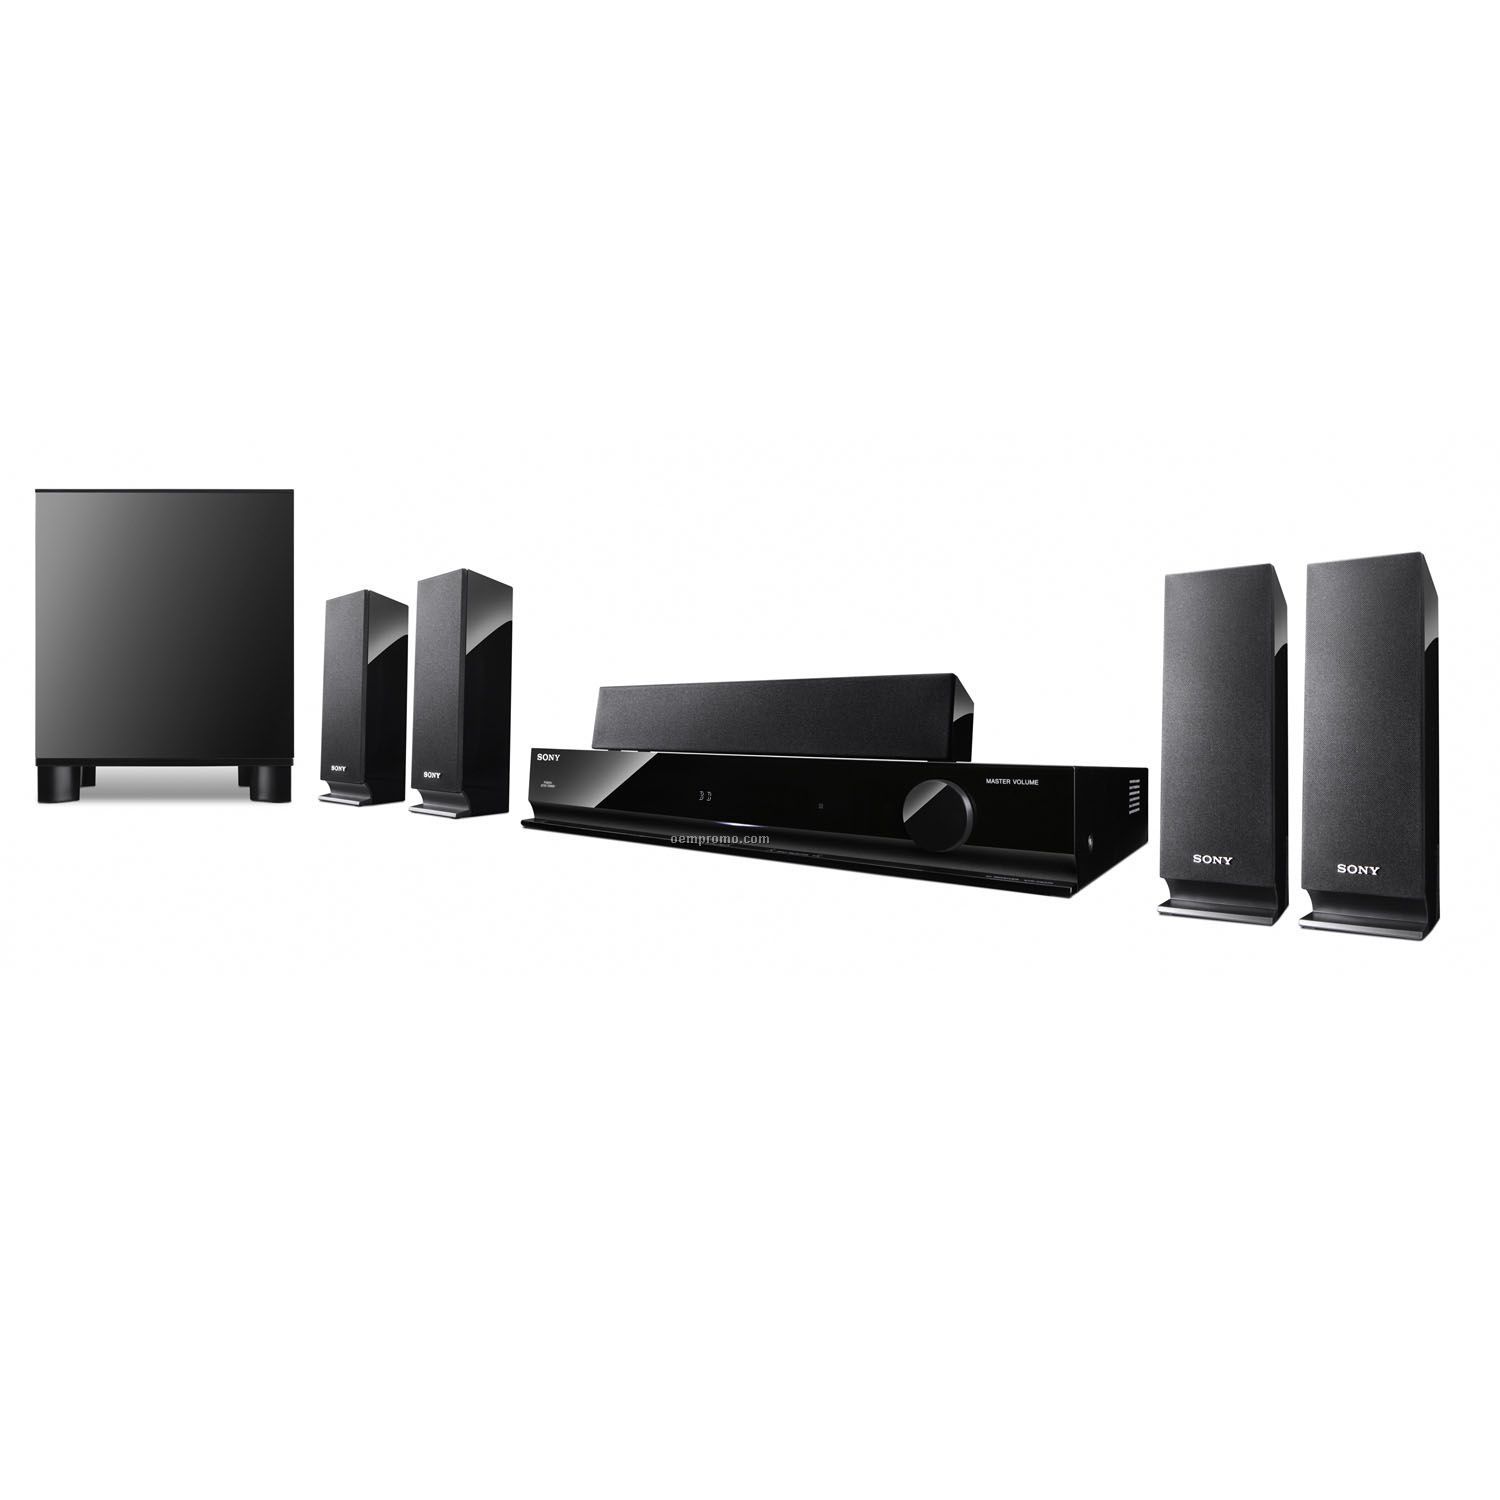 Sony 5.1 Channel Home Theater System